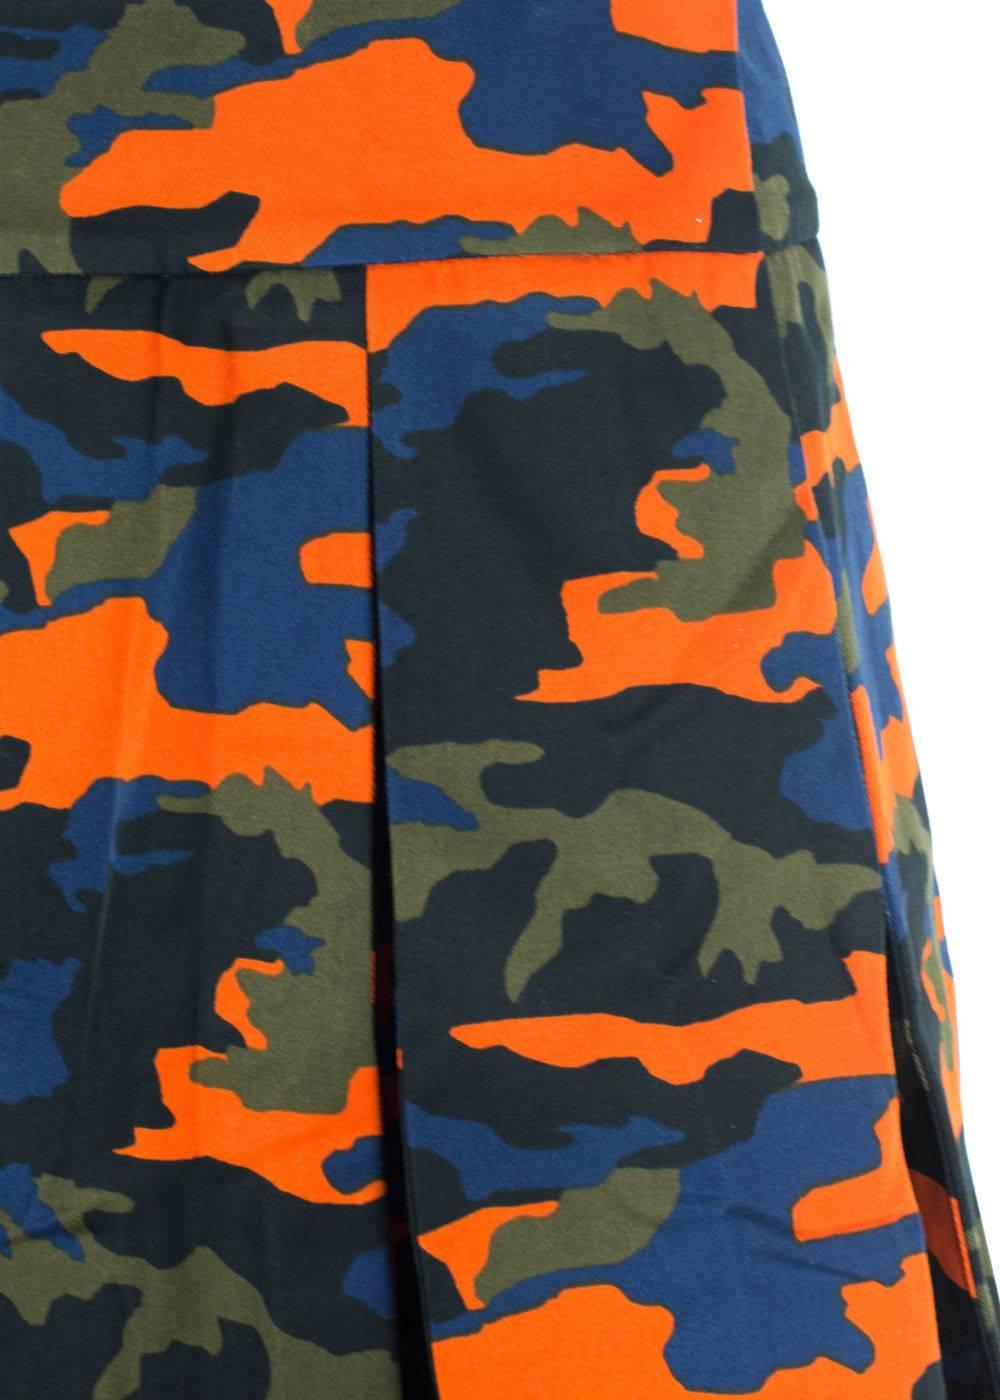 Brand New with Original Tag
Retails in Stores and Online $795
Size euro 52 US Medium

If you have the balls to wear this then this is the one for you. Givenchy provides the Camouflage Kilt that every person dreams of wearing but never does.